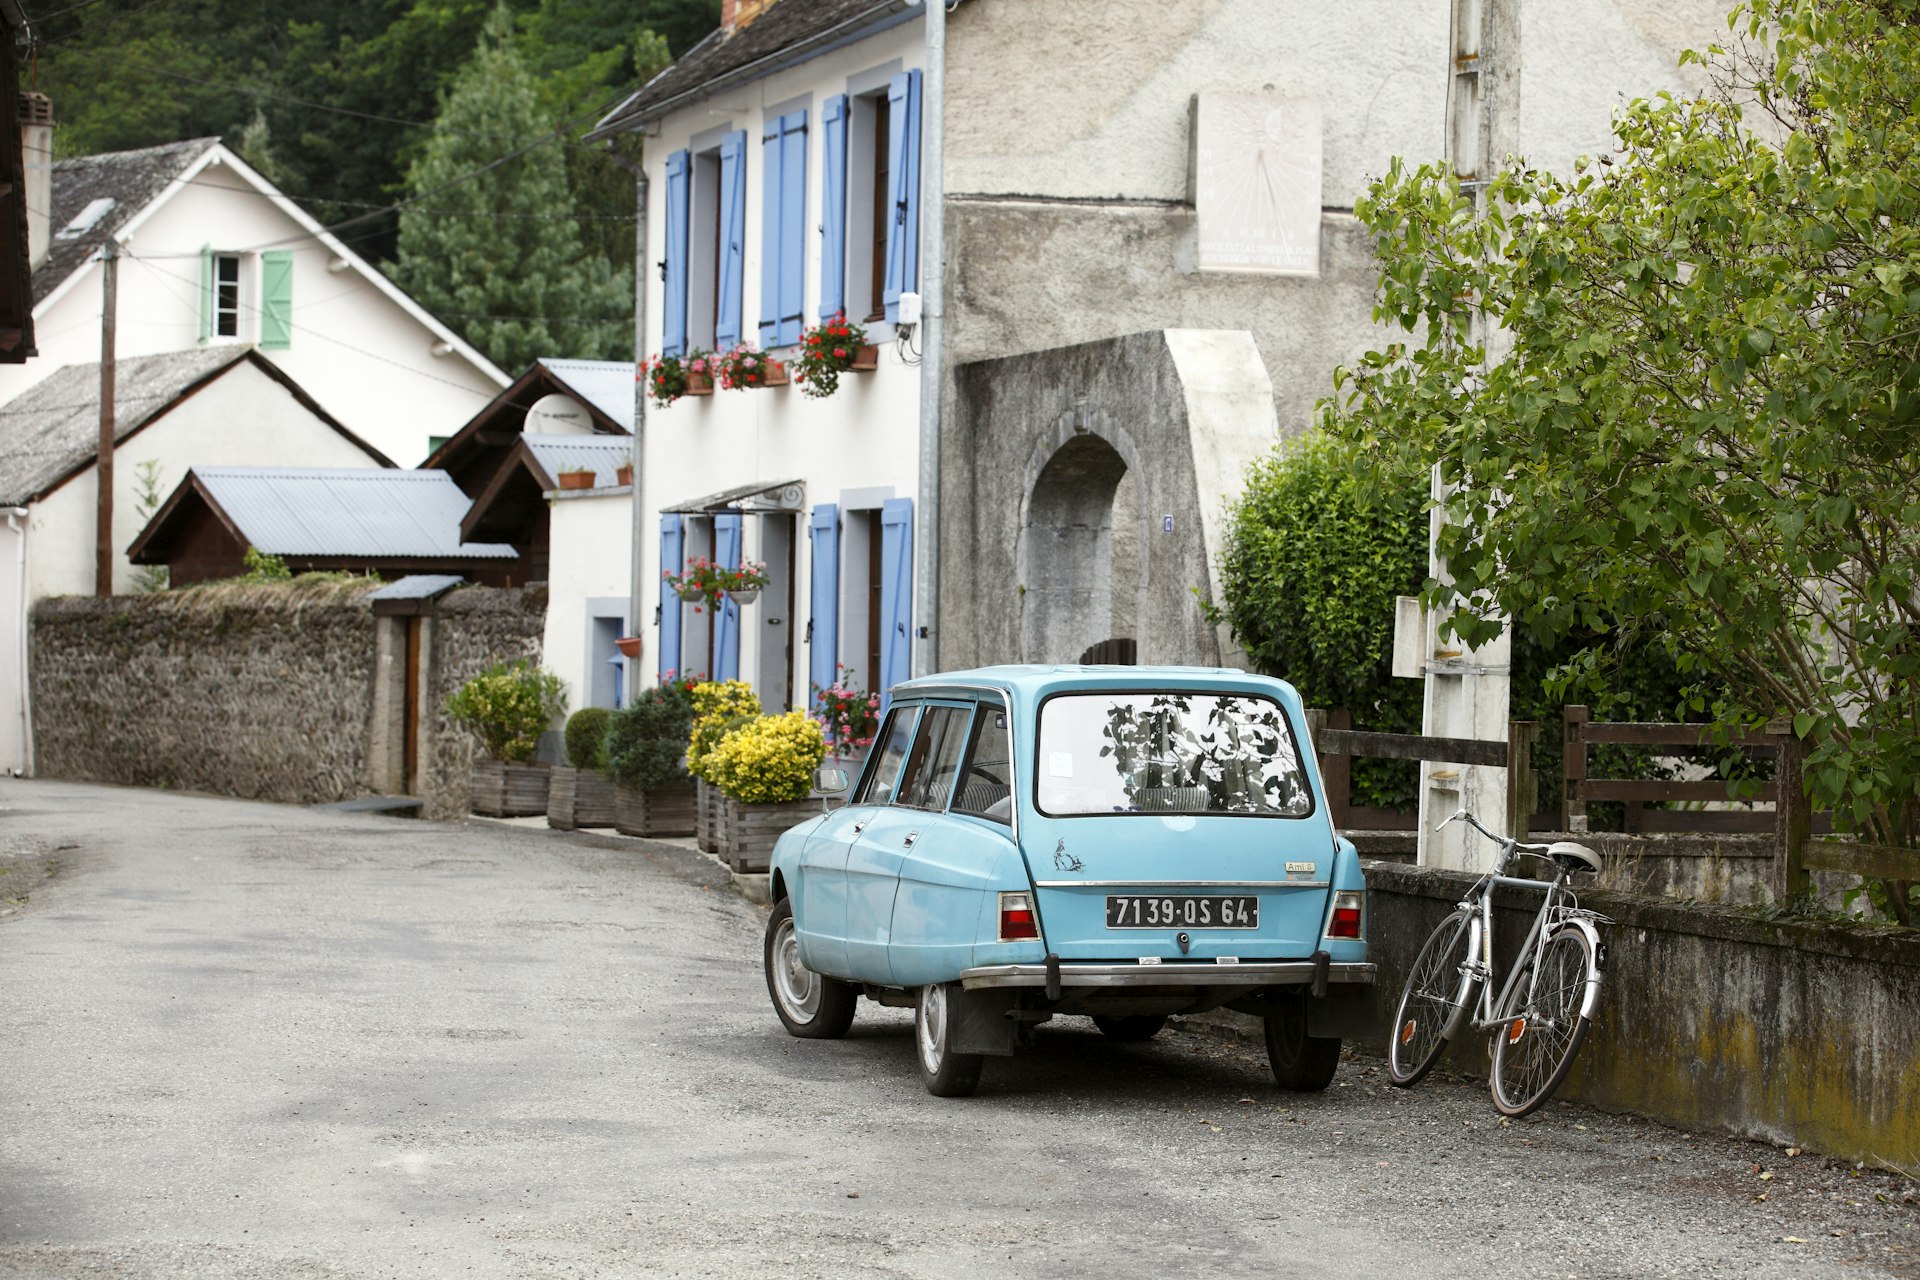 Citroen Ami 8 parked on street in Arette in Pyrenees